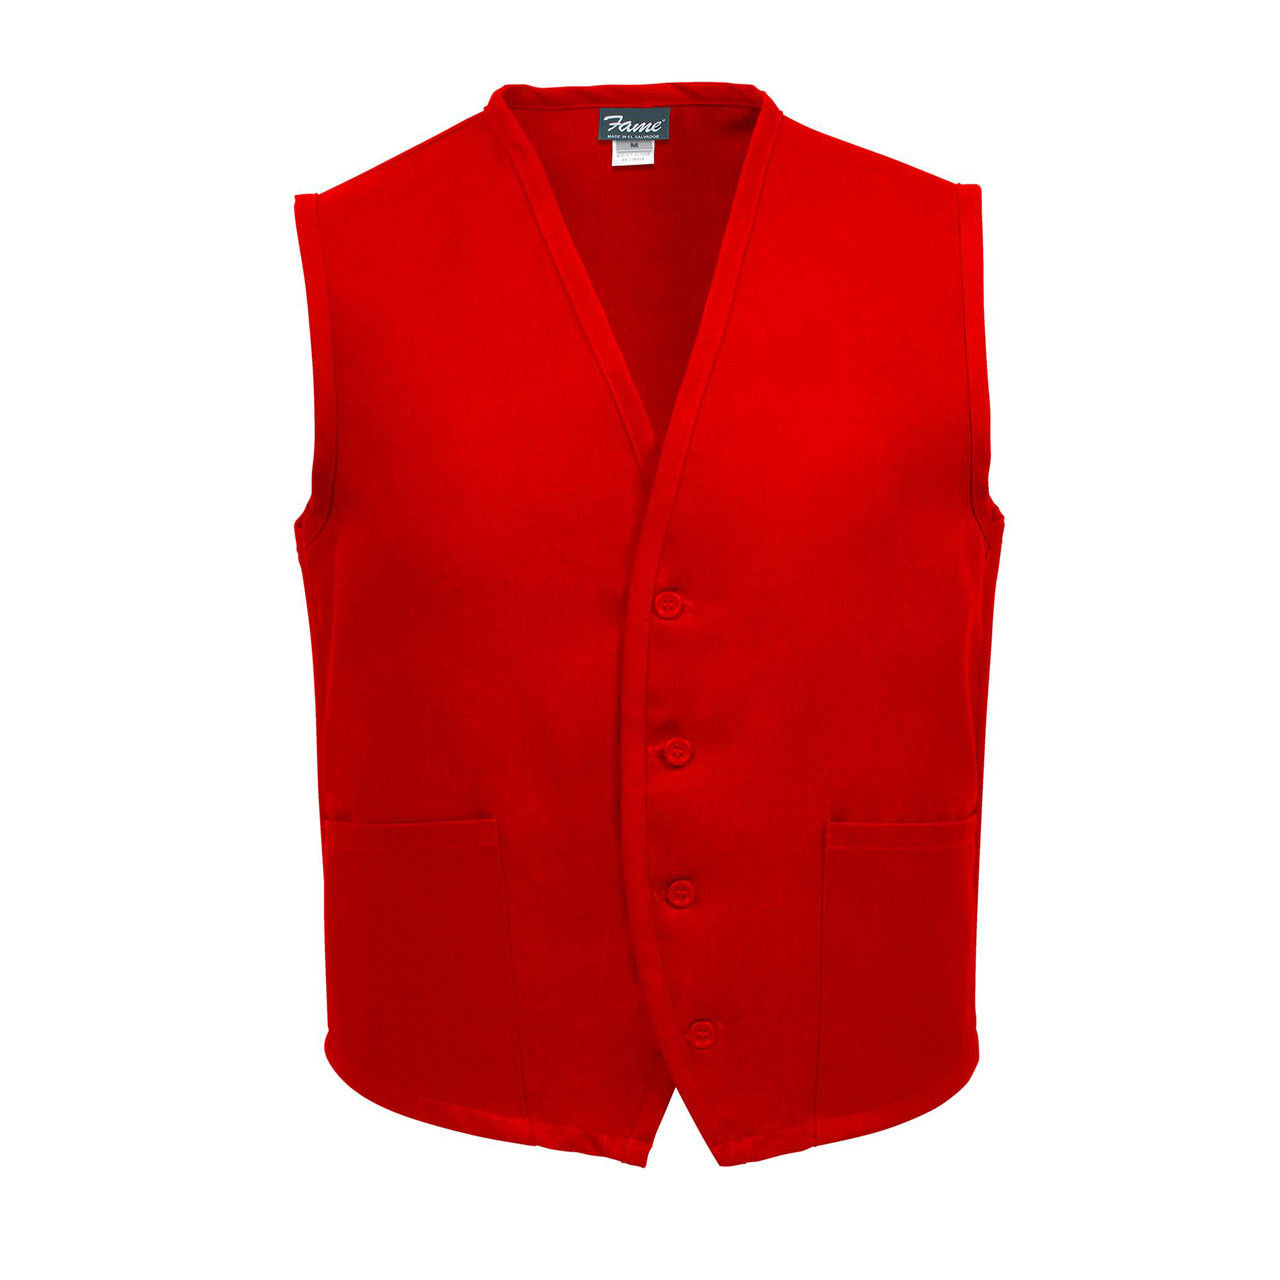 What are the specifics of the red vest, Unisex Uniform Vest, with 2 pockets?